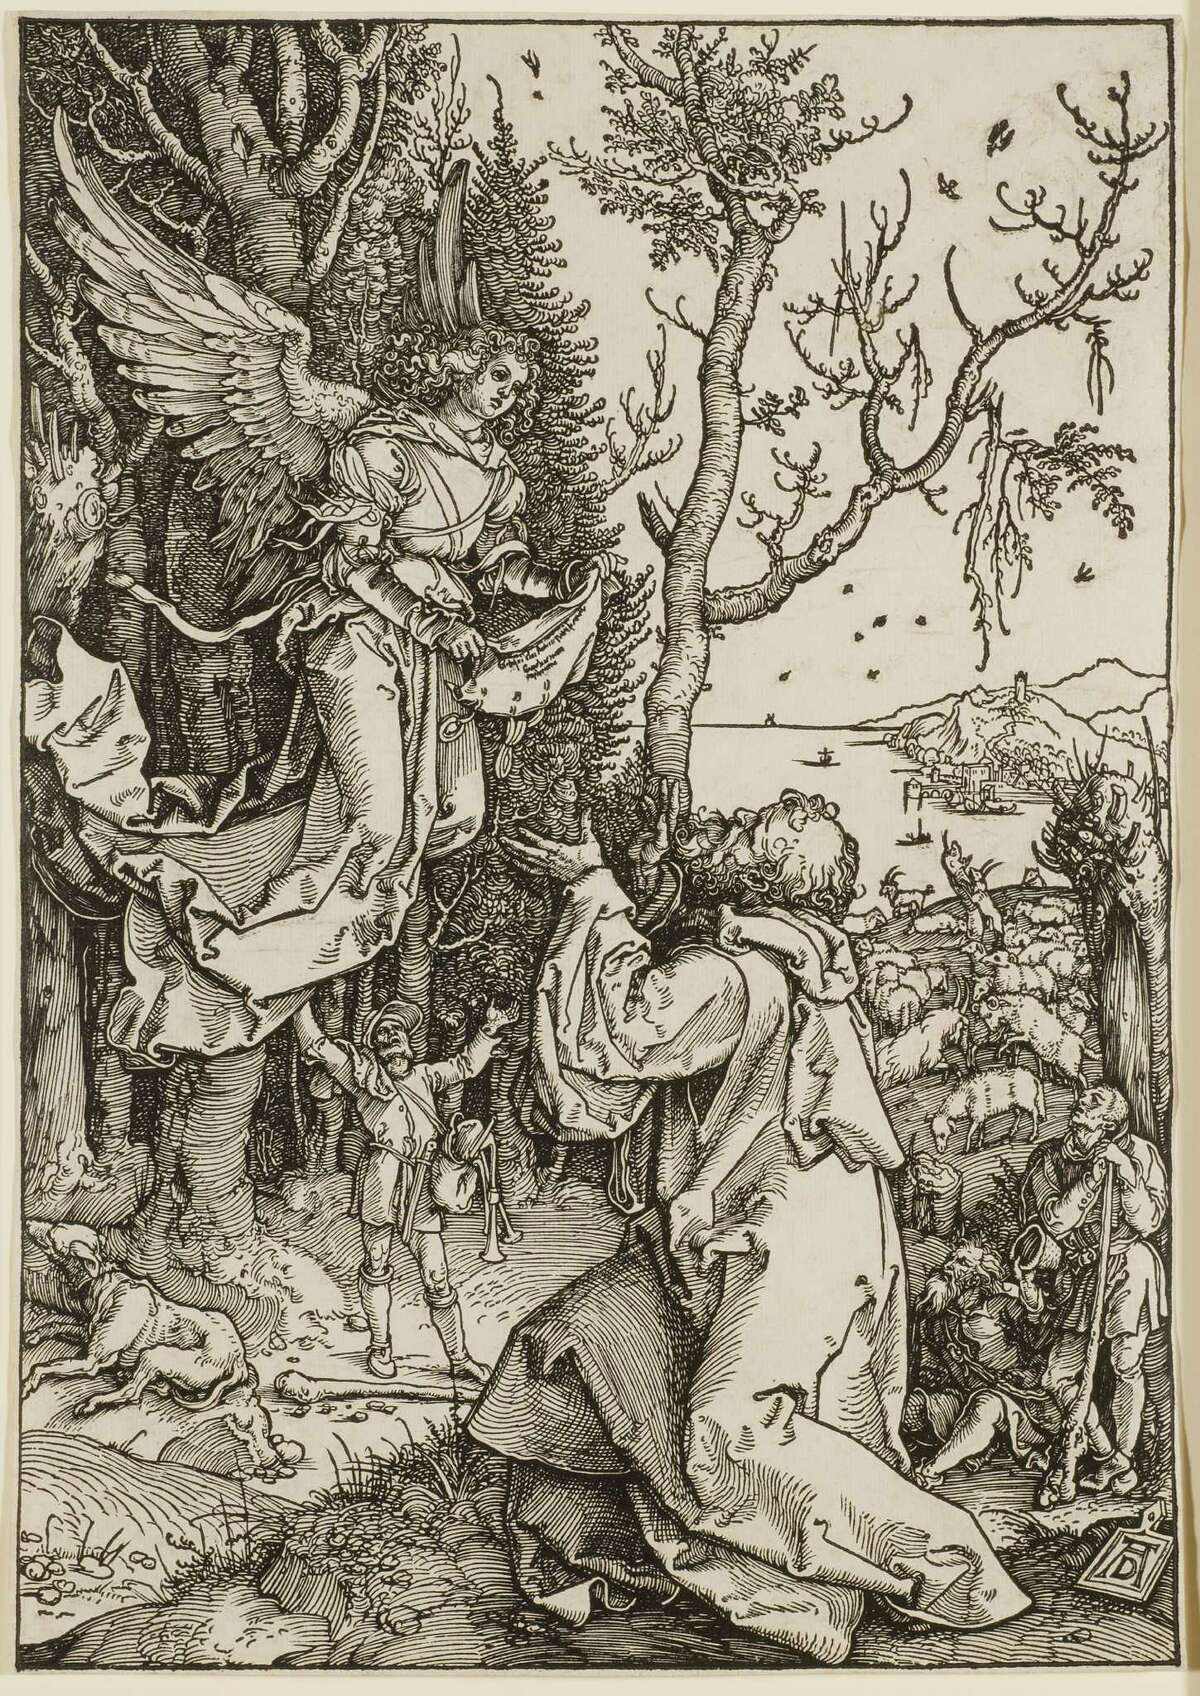 The exhibition "Prints from the Collection of Dr. Dorrance T. Kelly" opens June 15, at the Bruce Museum. Among the works on display is Albrecht Dürer's "Joachim and the Angel," above.